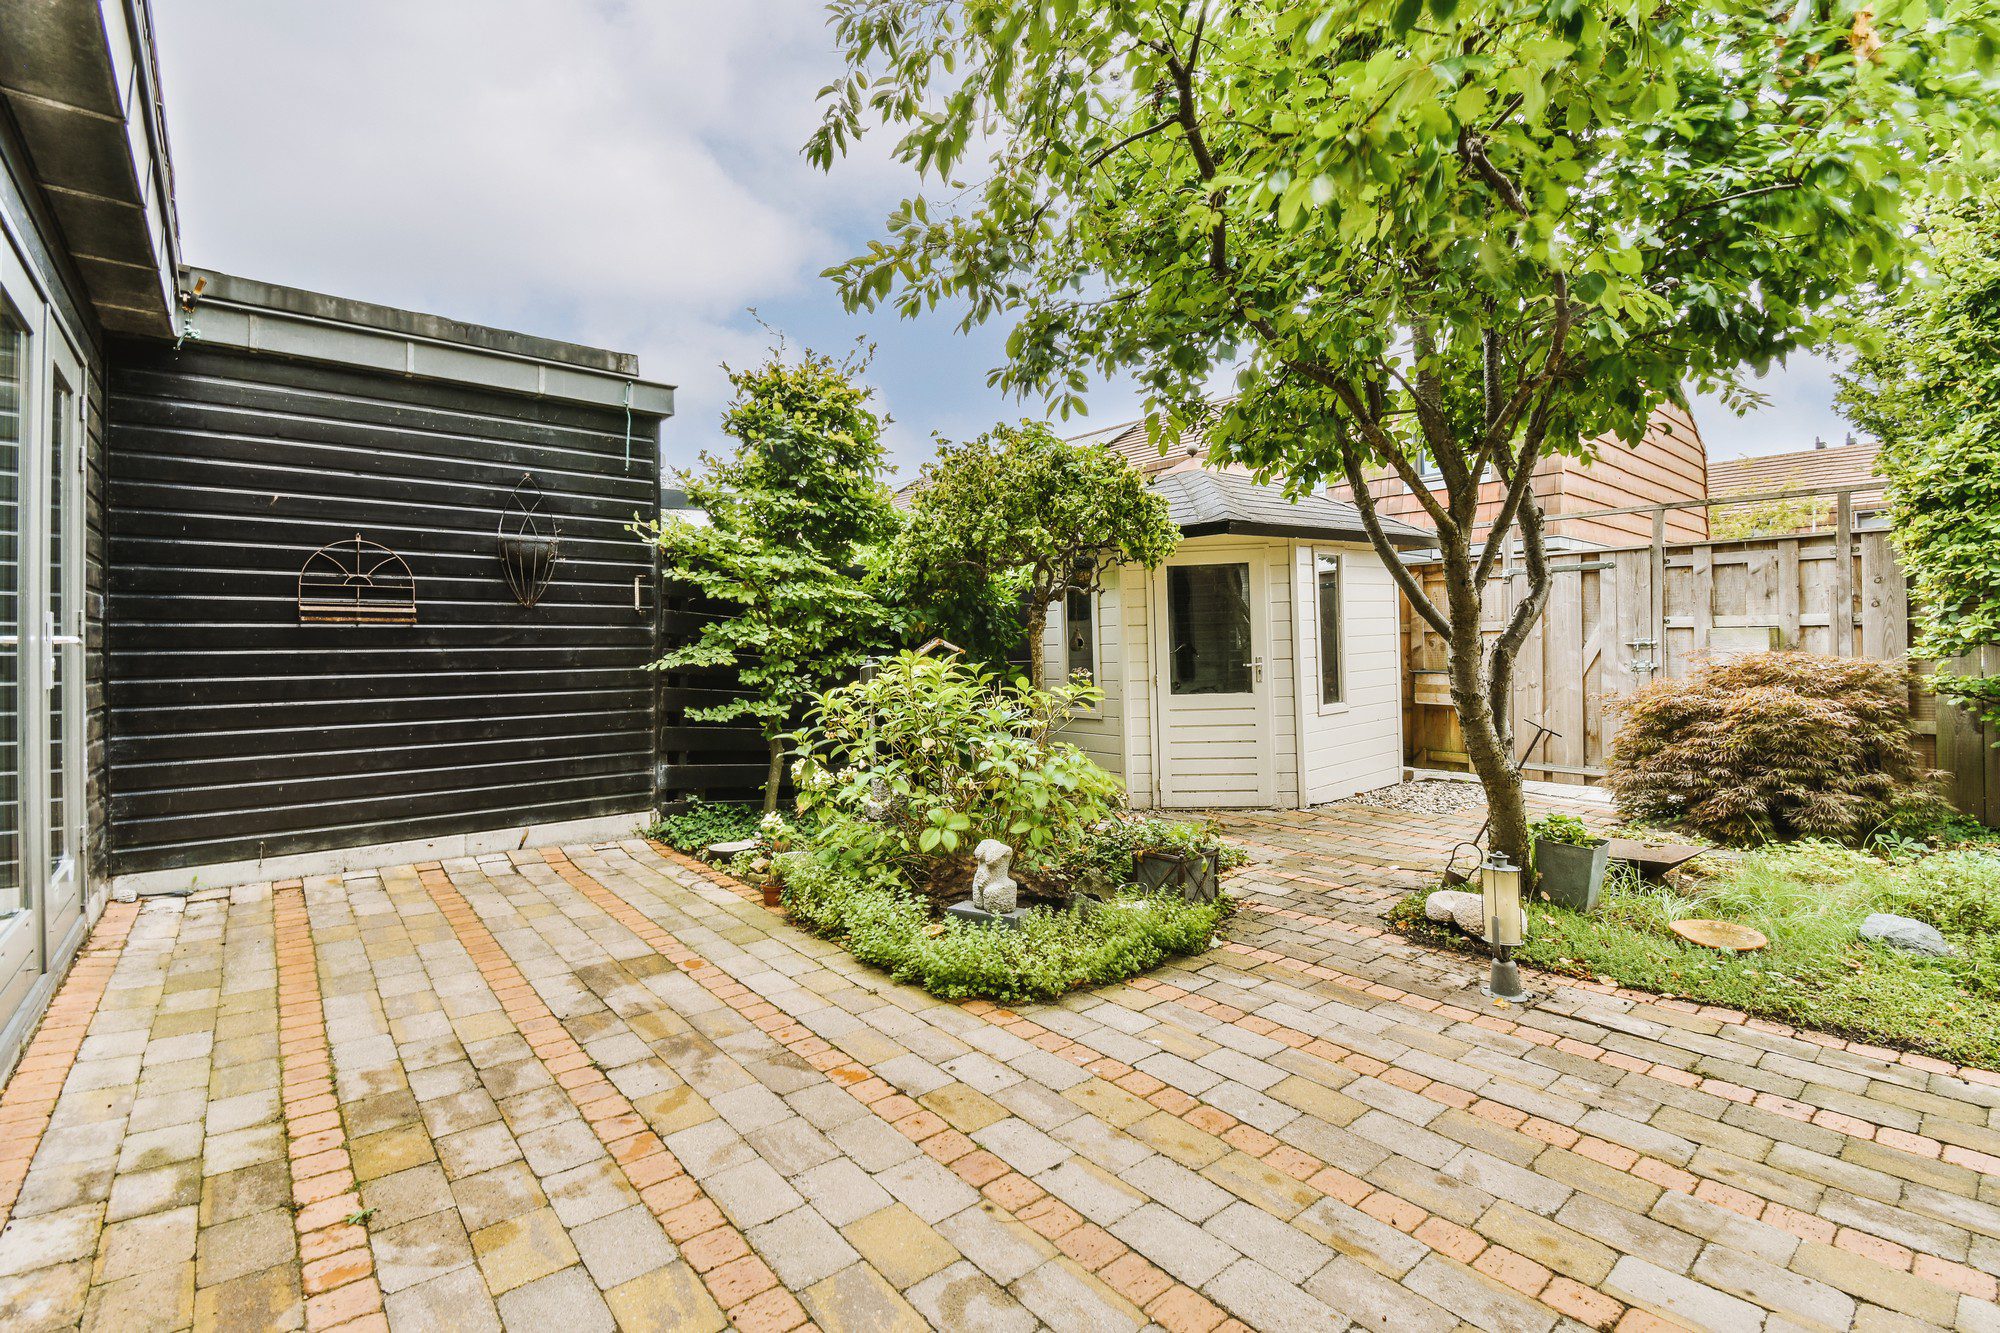 This image shows a cosy backyard patio and garden area. The patio is paved with red brick pavers arranged in a pattern, and there's a lush tree in the centre providing shade. The right side features a small, cream-coloured building that could be a shed or storage space, and there is a wooden fence at the back indicating the boundary of the property. On the left, a dark-painted exterior wall of a house is visible with two decorative metal pieces that resemble window frames mounted on the wall. The garden around the patio is well-maintained with an array of green plants and shrubs. Some garden decorations, like a bird bath and what appears to be a small statue, can be seen among the plants. The sky is partly cloudy, suggesting a temperate outdoor setting.